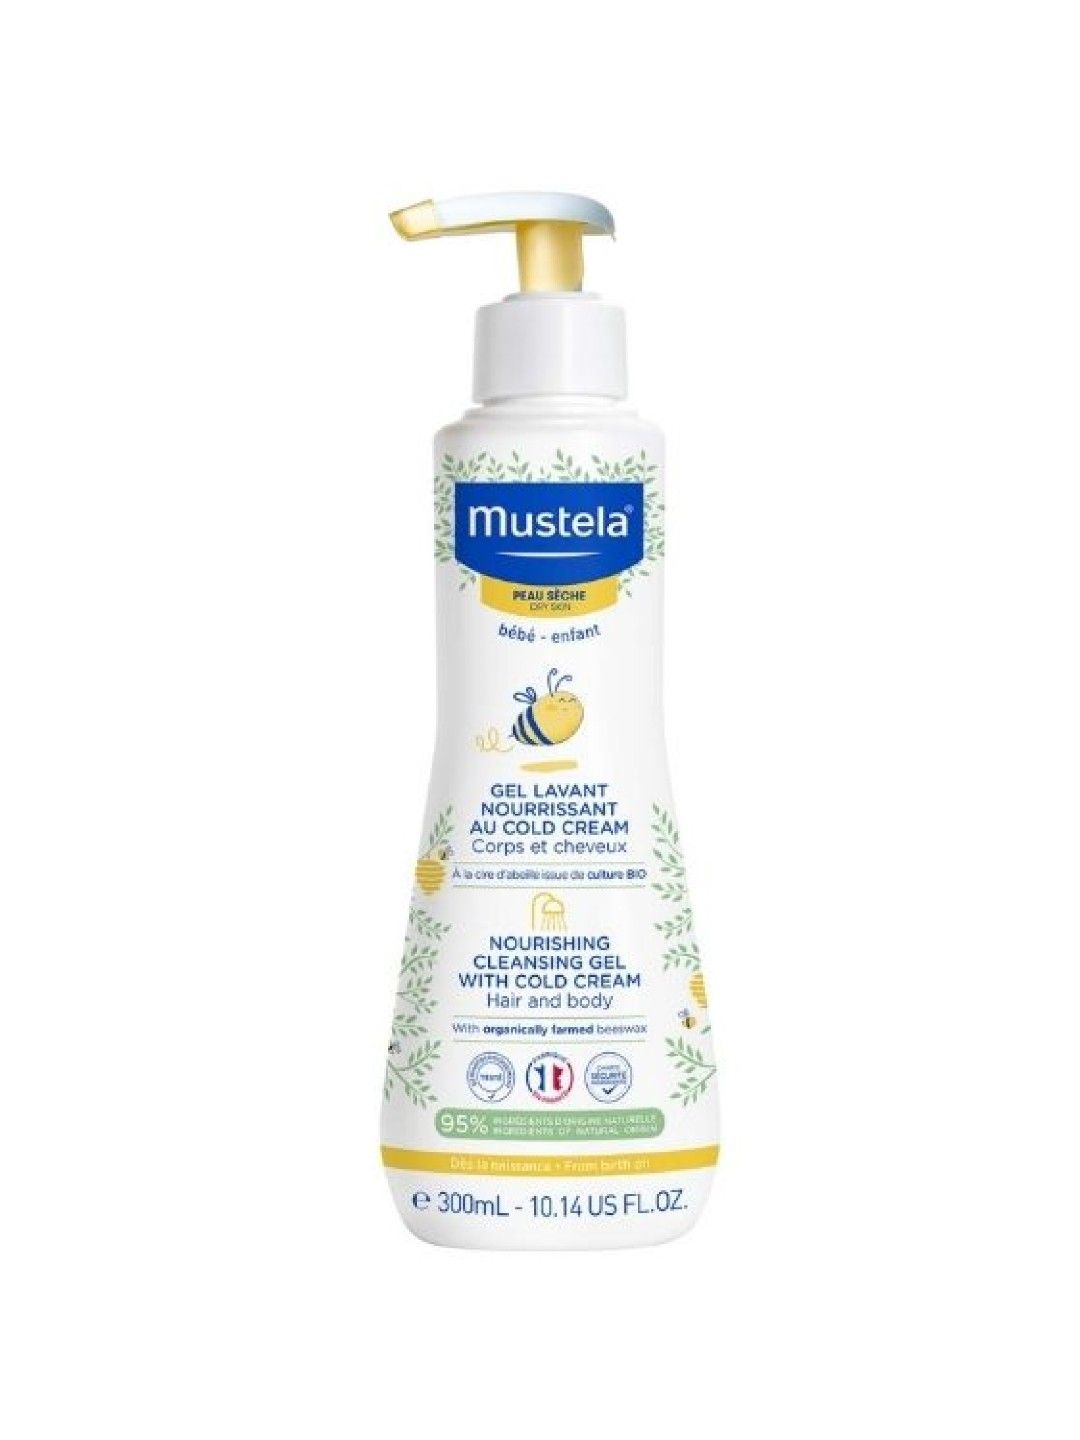 Mustela Nourishing Cleansing Gel with Cold Cream (300ml)